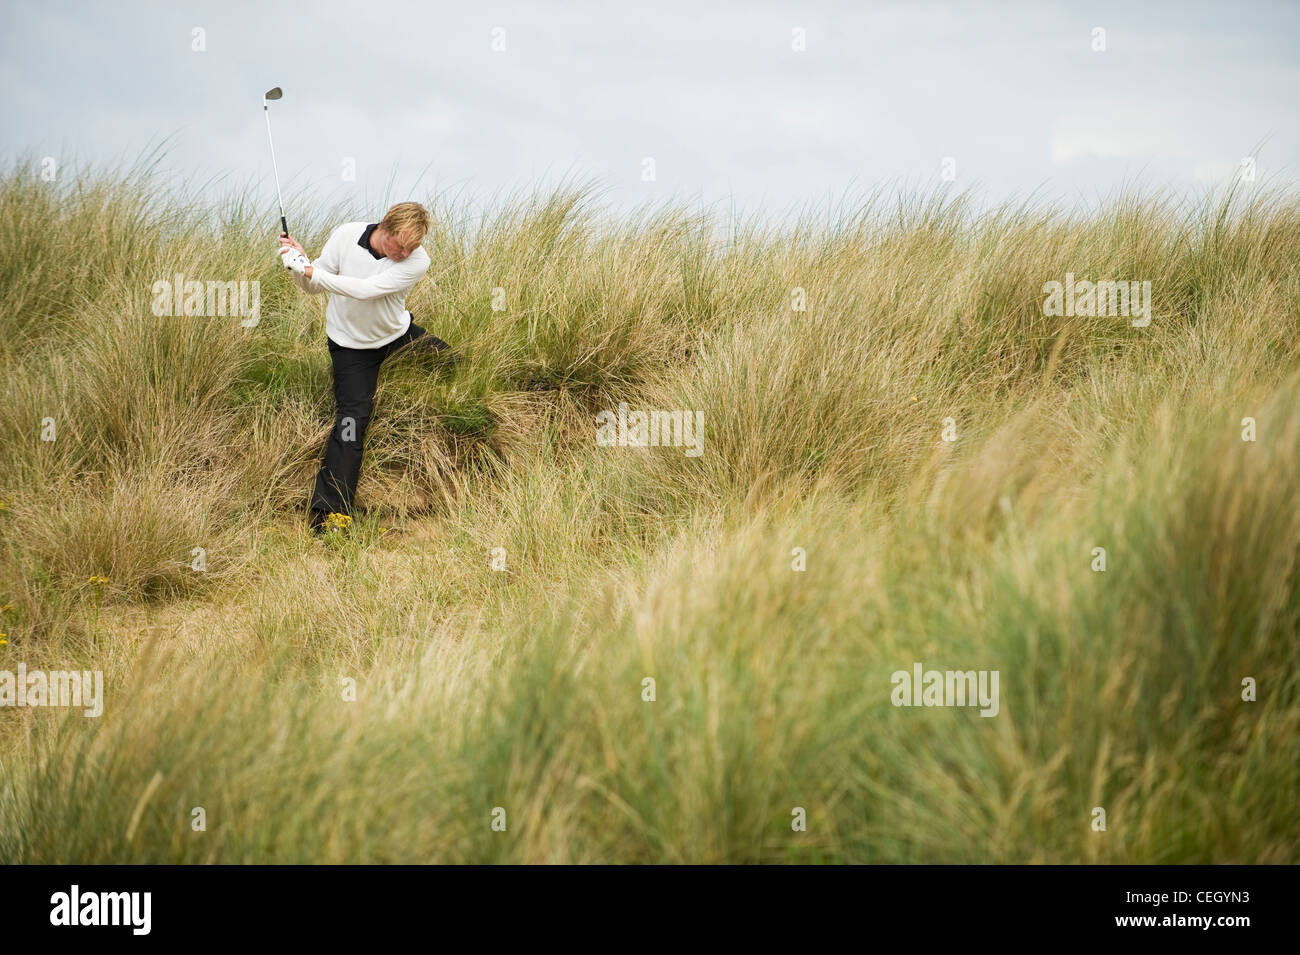 A golfplayer in the rough. Stock Photo